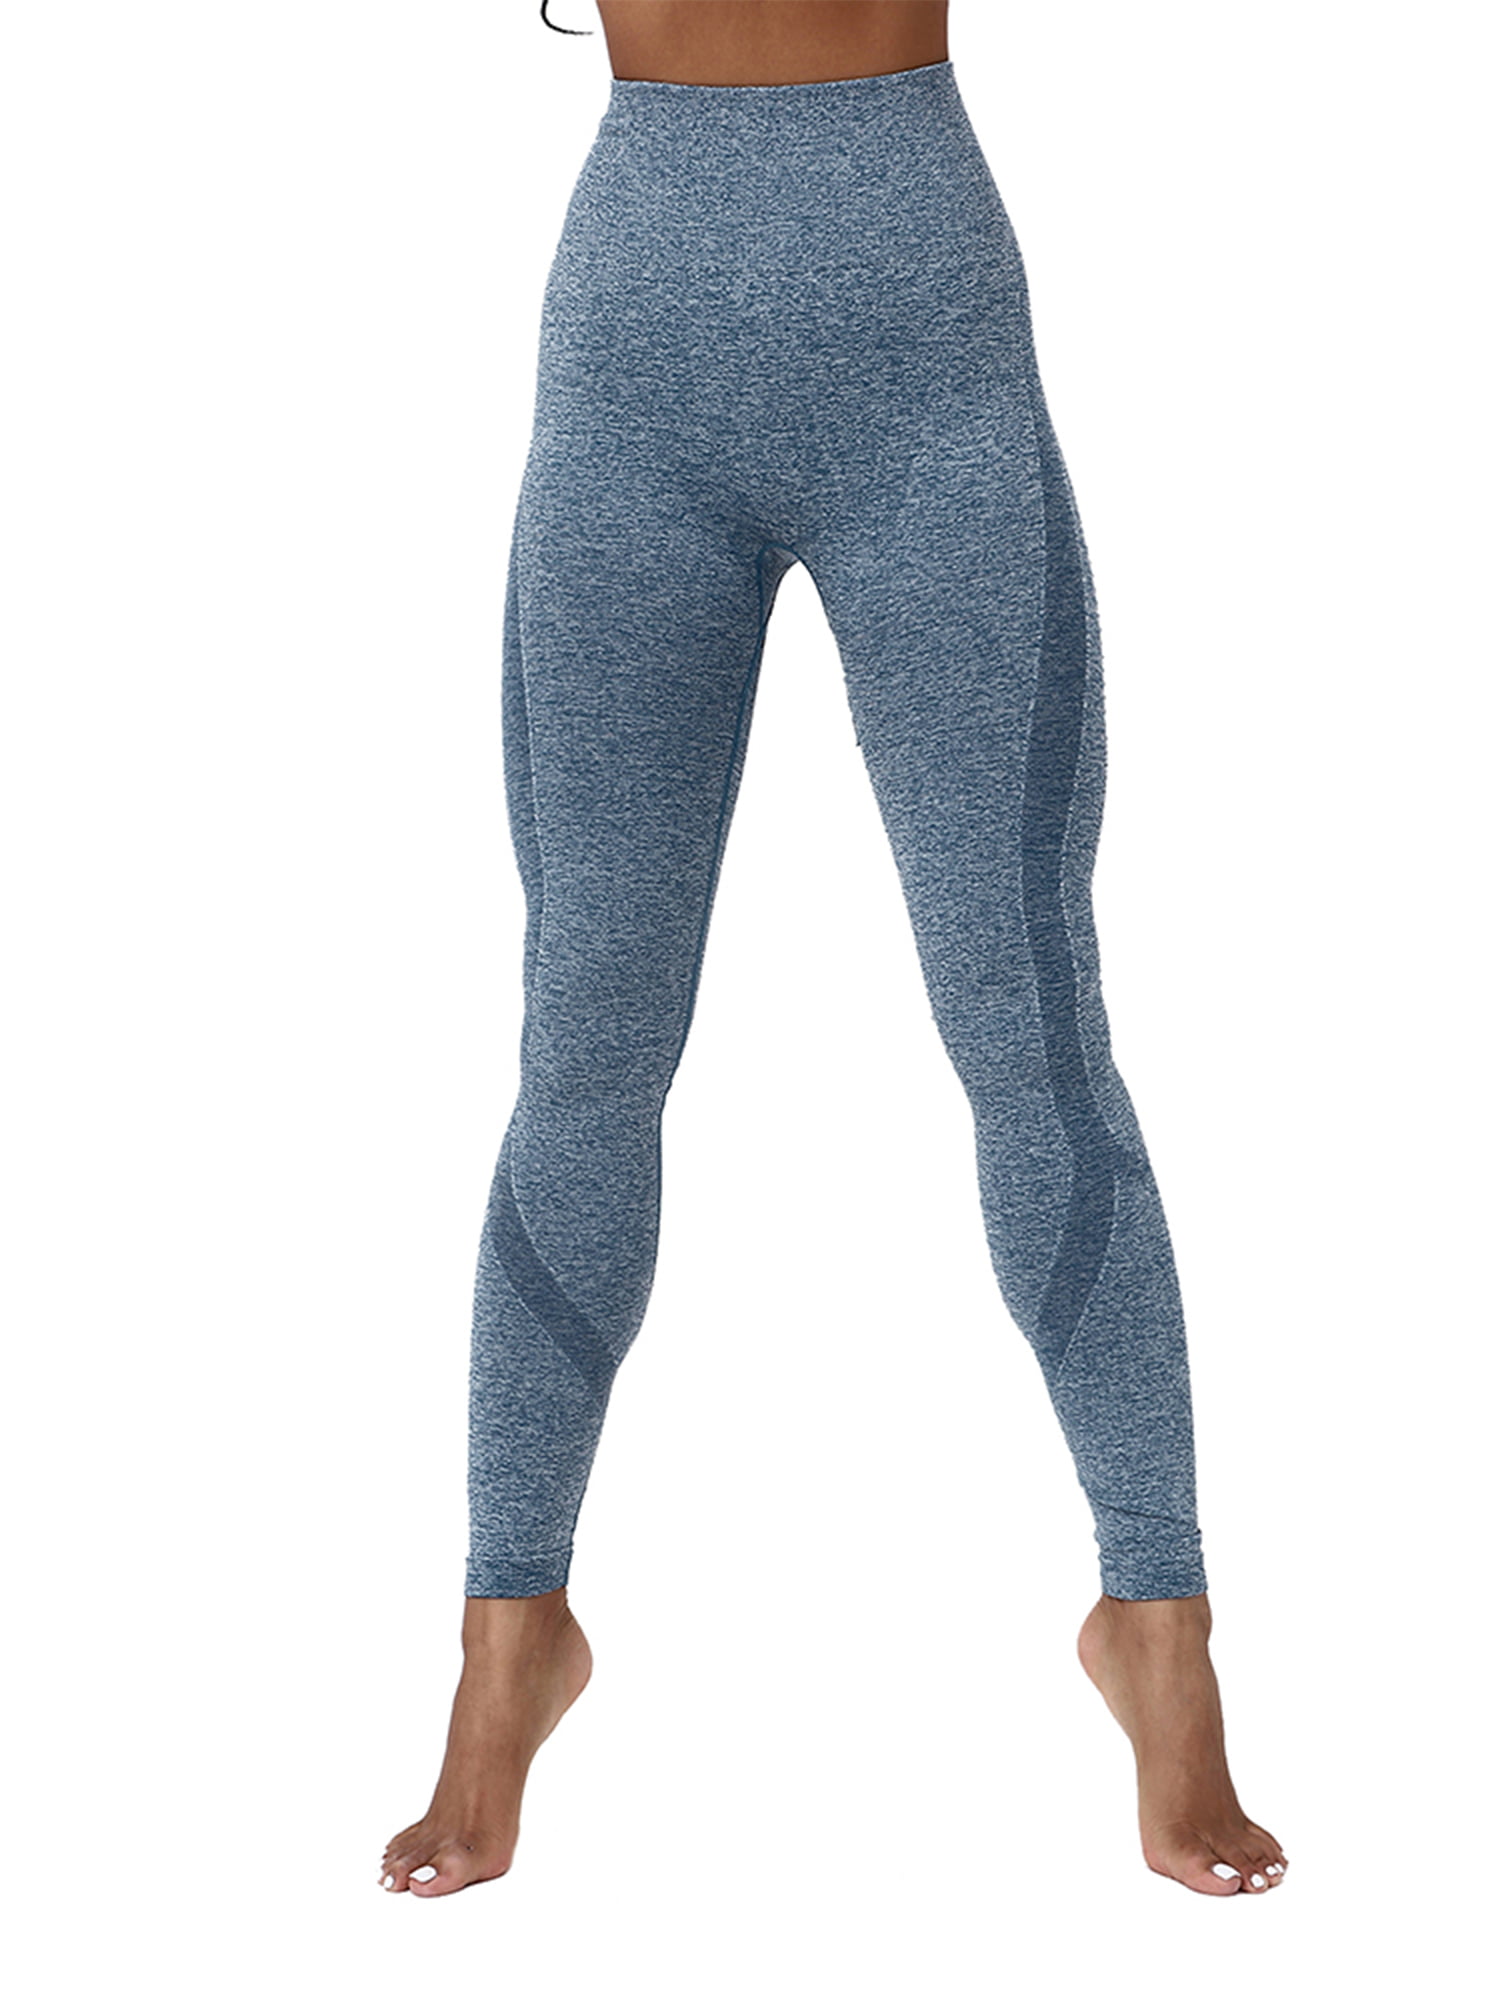 Ladies Leggings All Weather Full Length Plain Stretchable Sports Yoga Trousers 